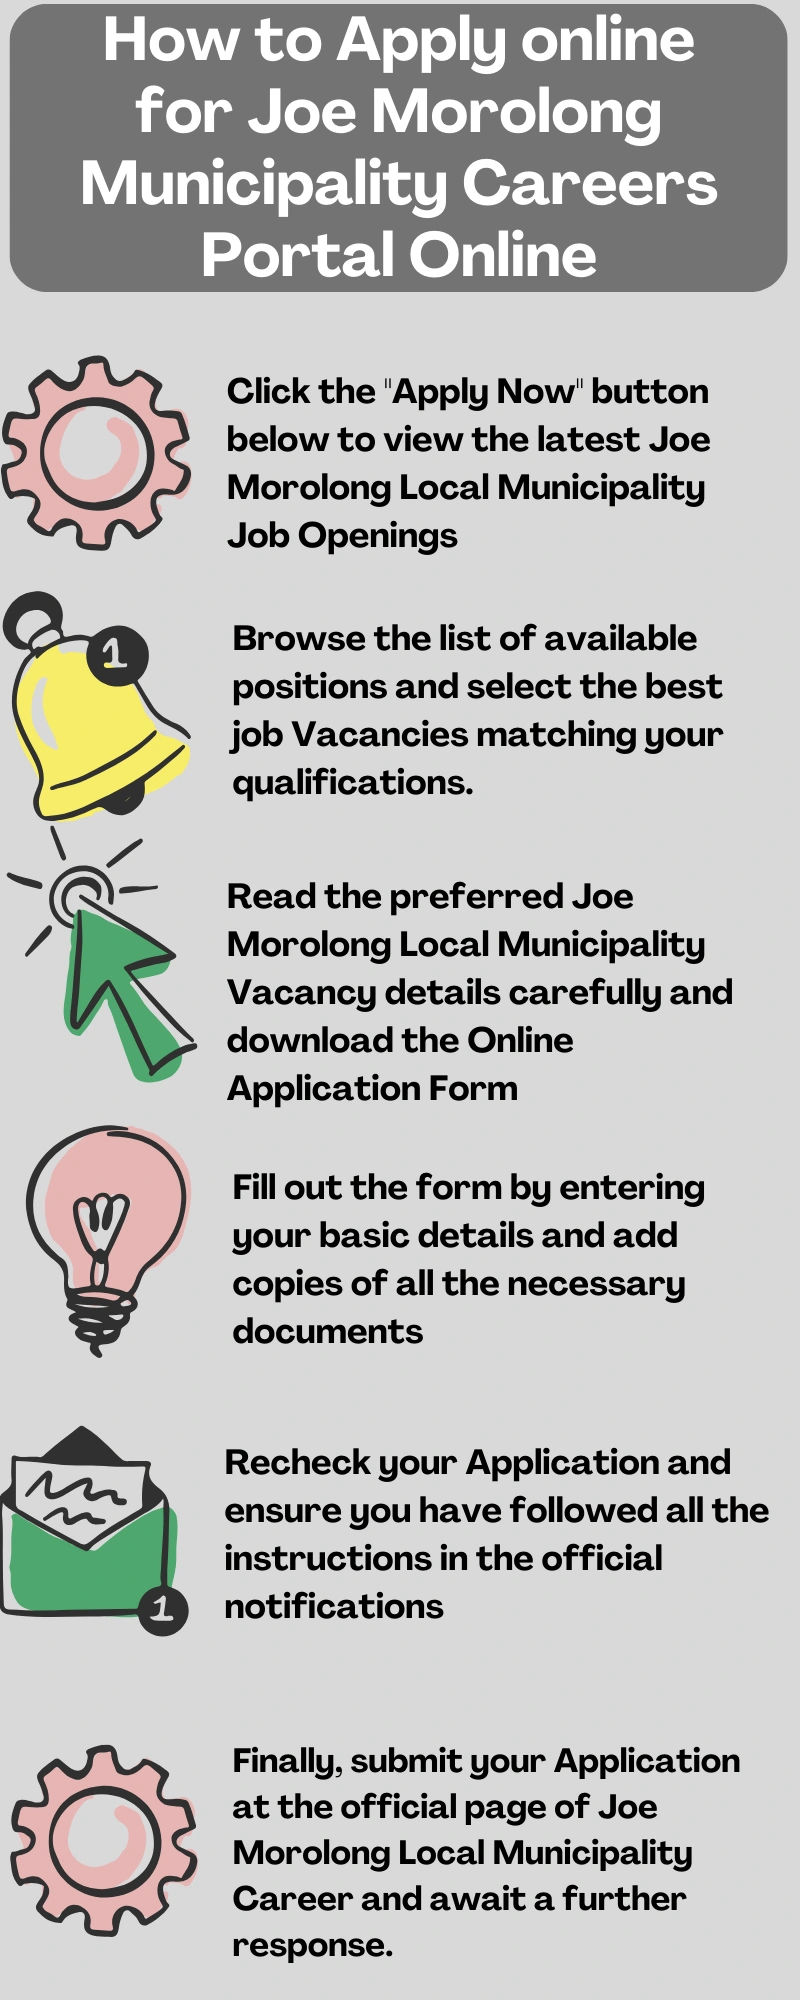 How to Apply online for Joe Morolong Municipality Careers Portal Online